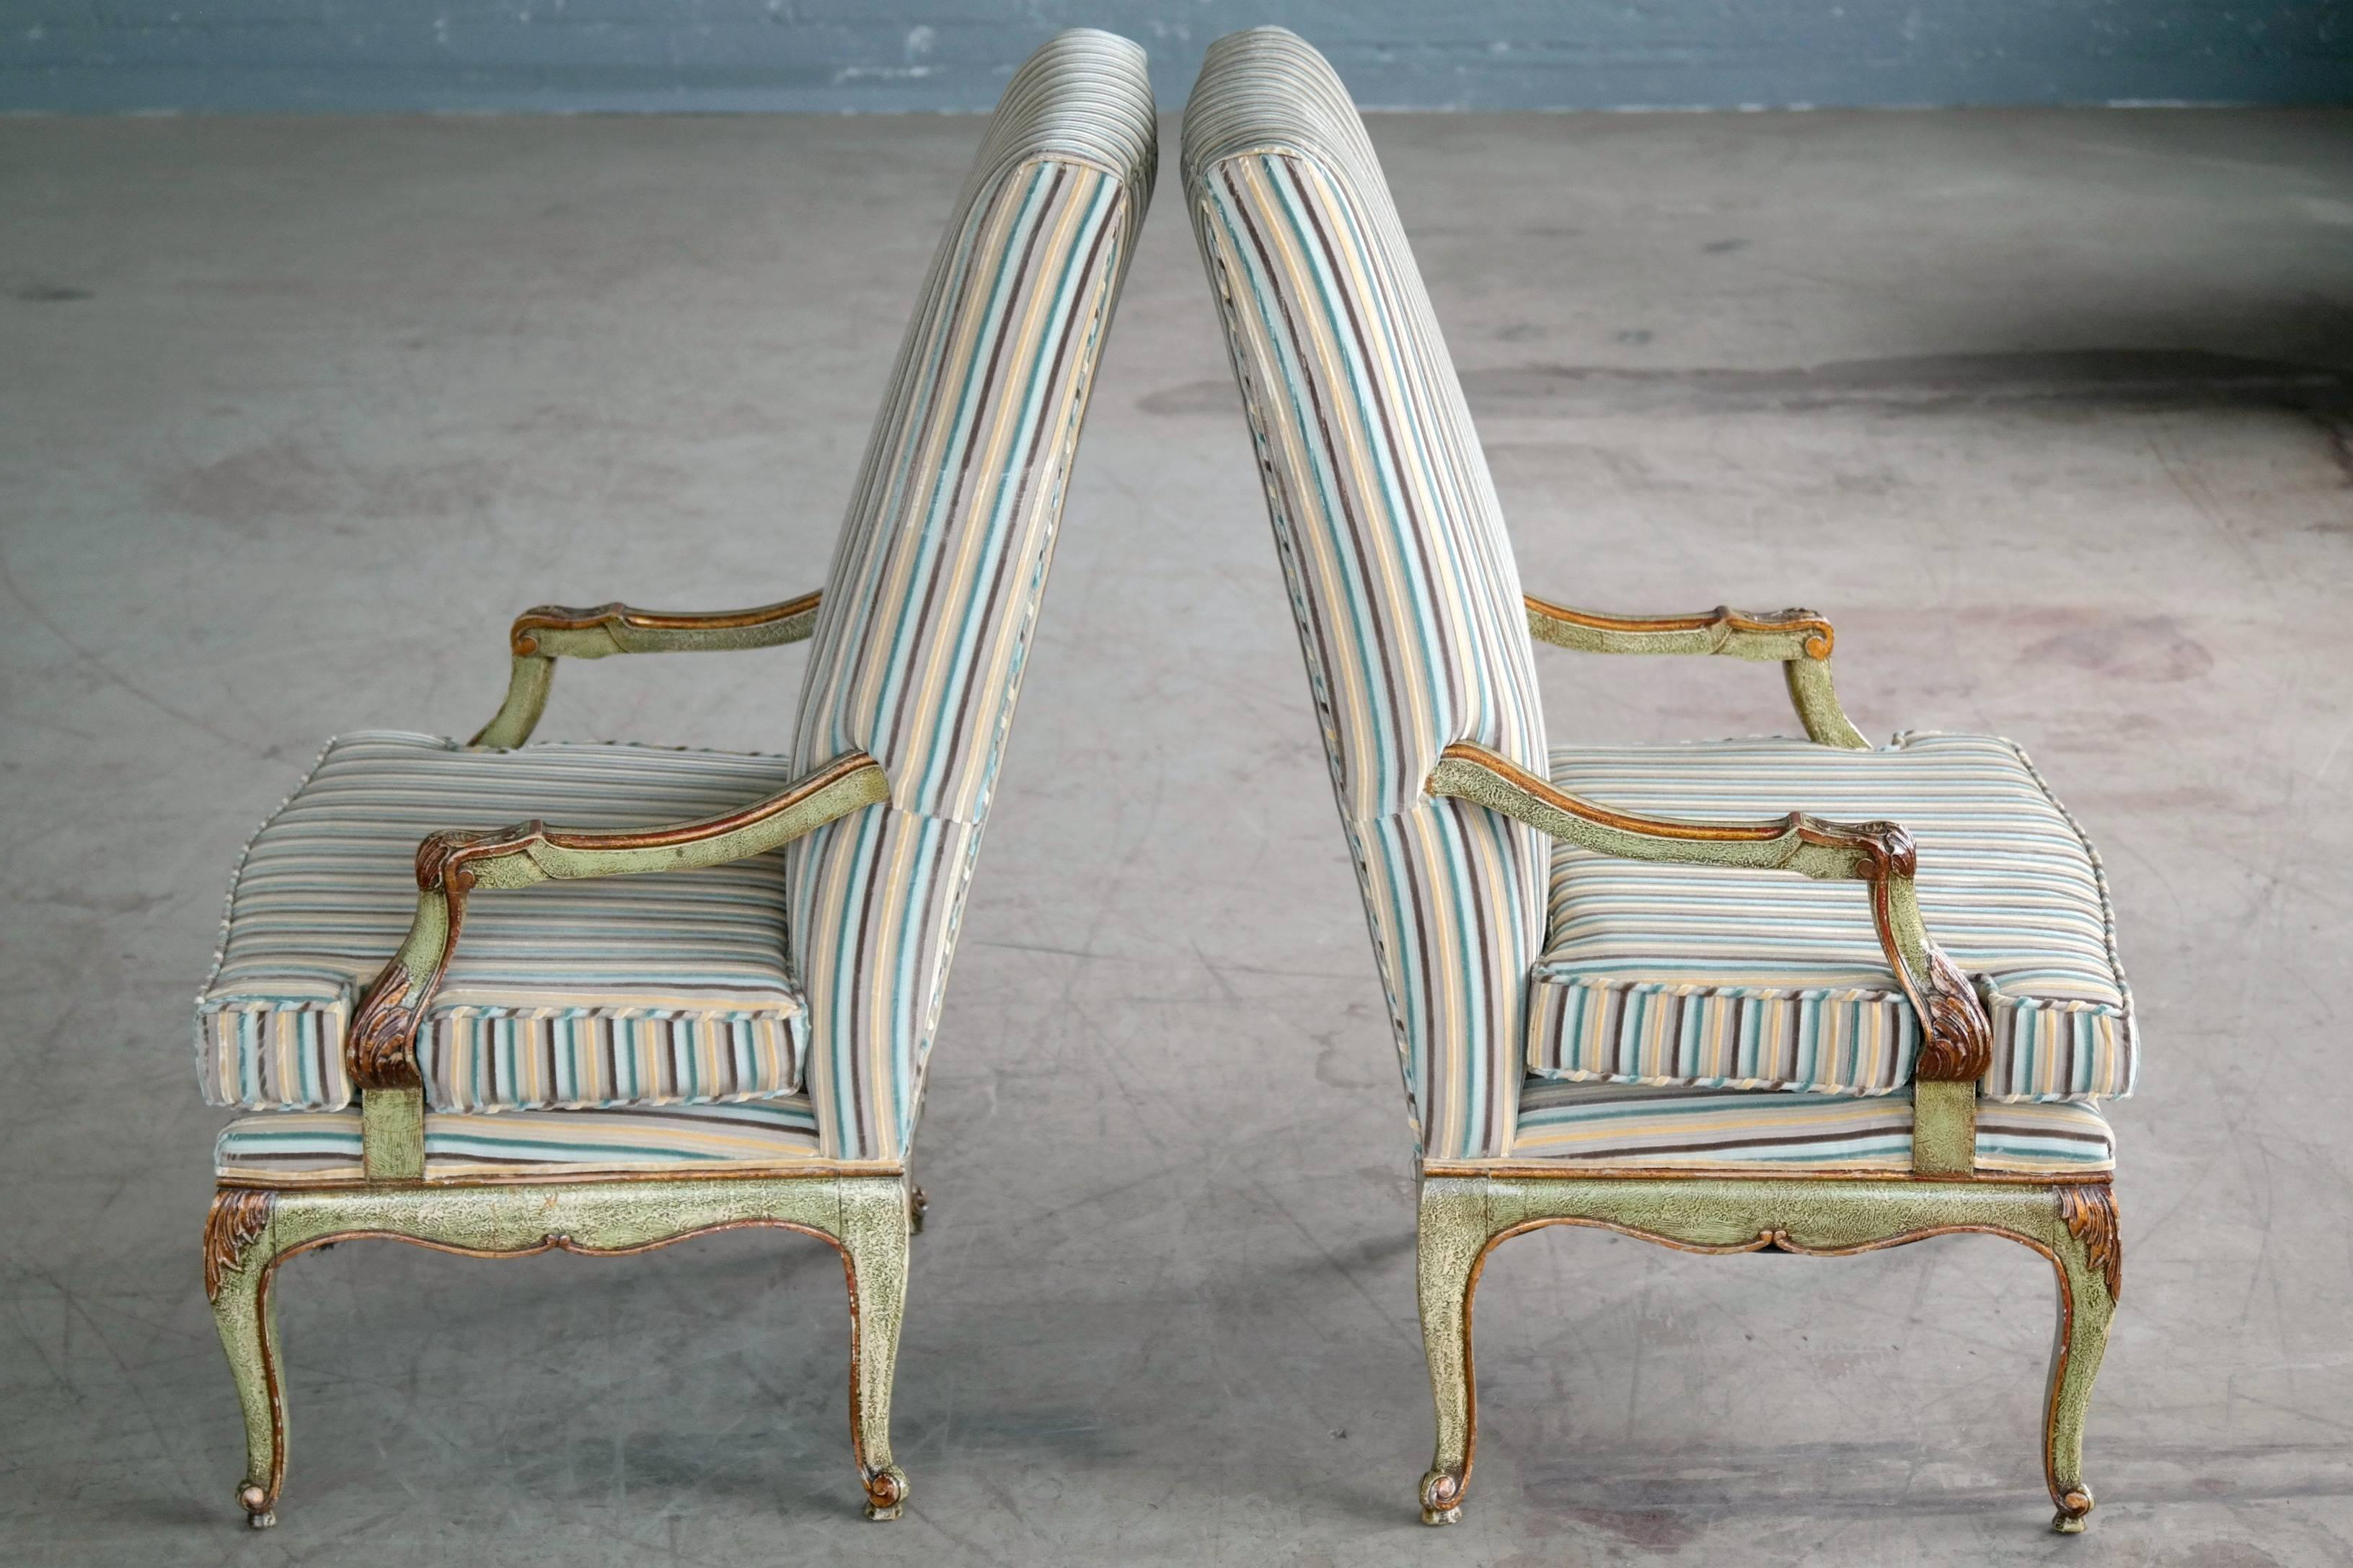 Late 19th Century Danish Regency Style Armchairs from Early 1900s